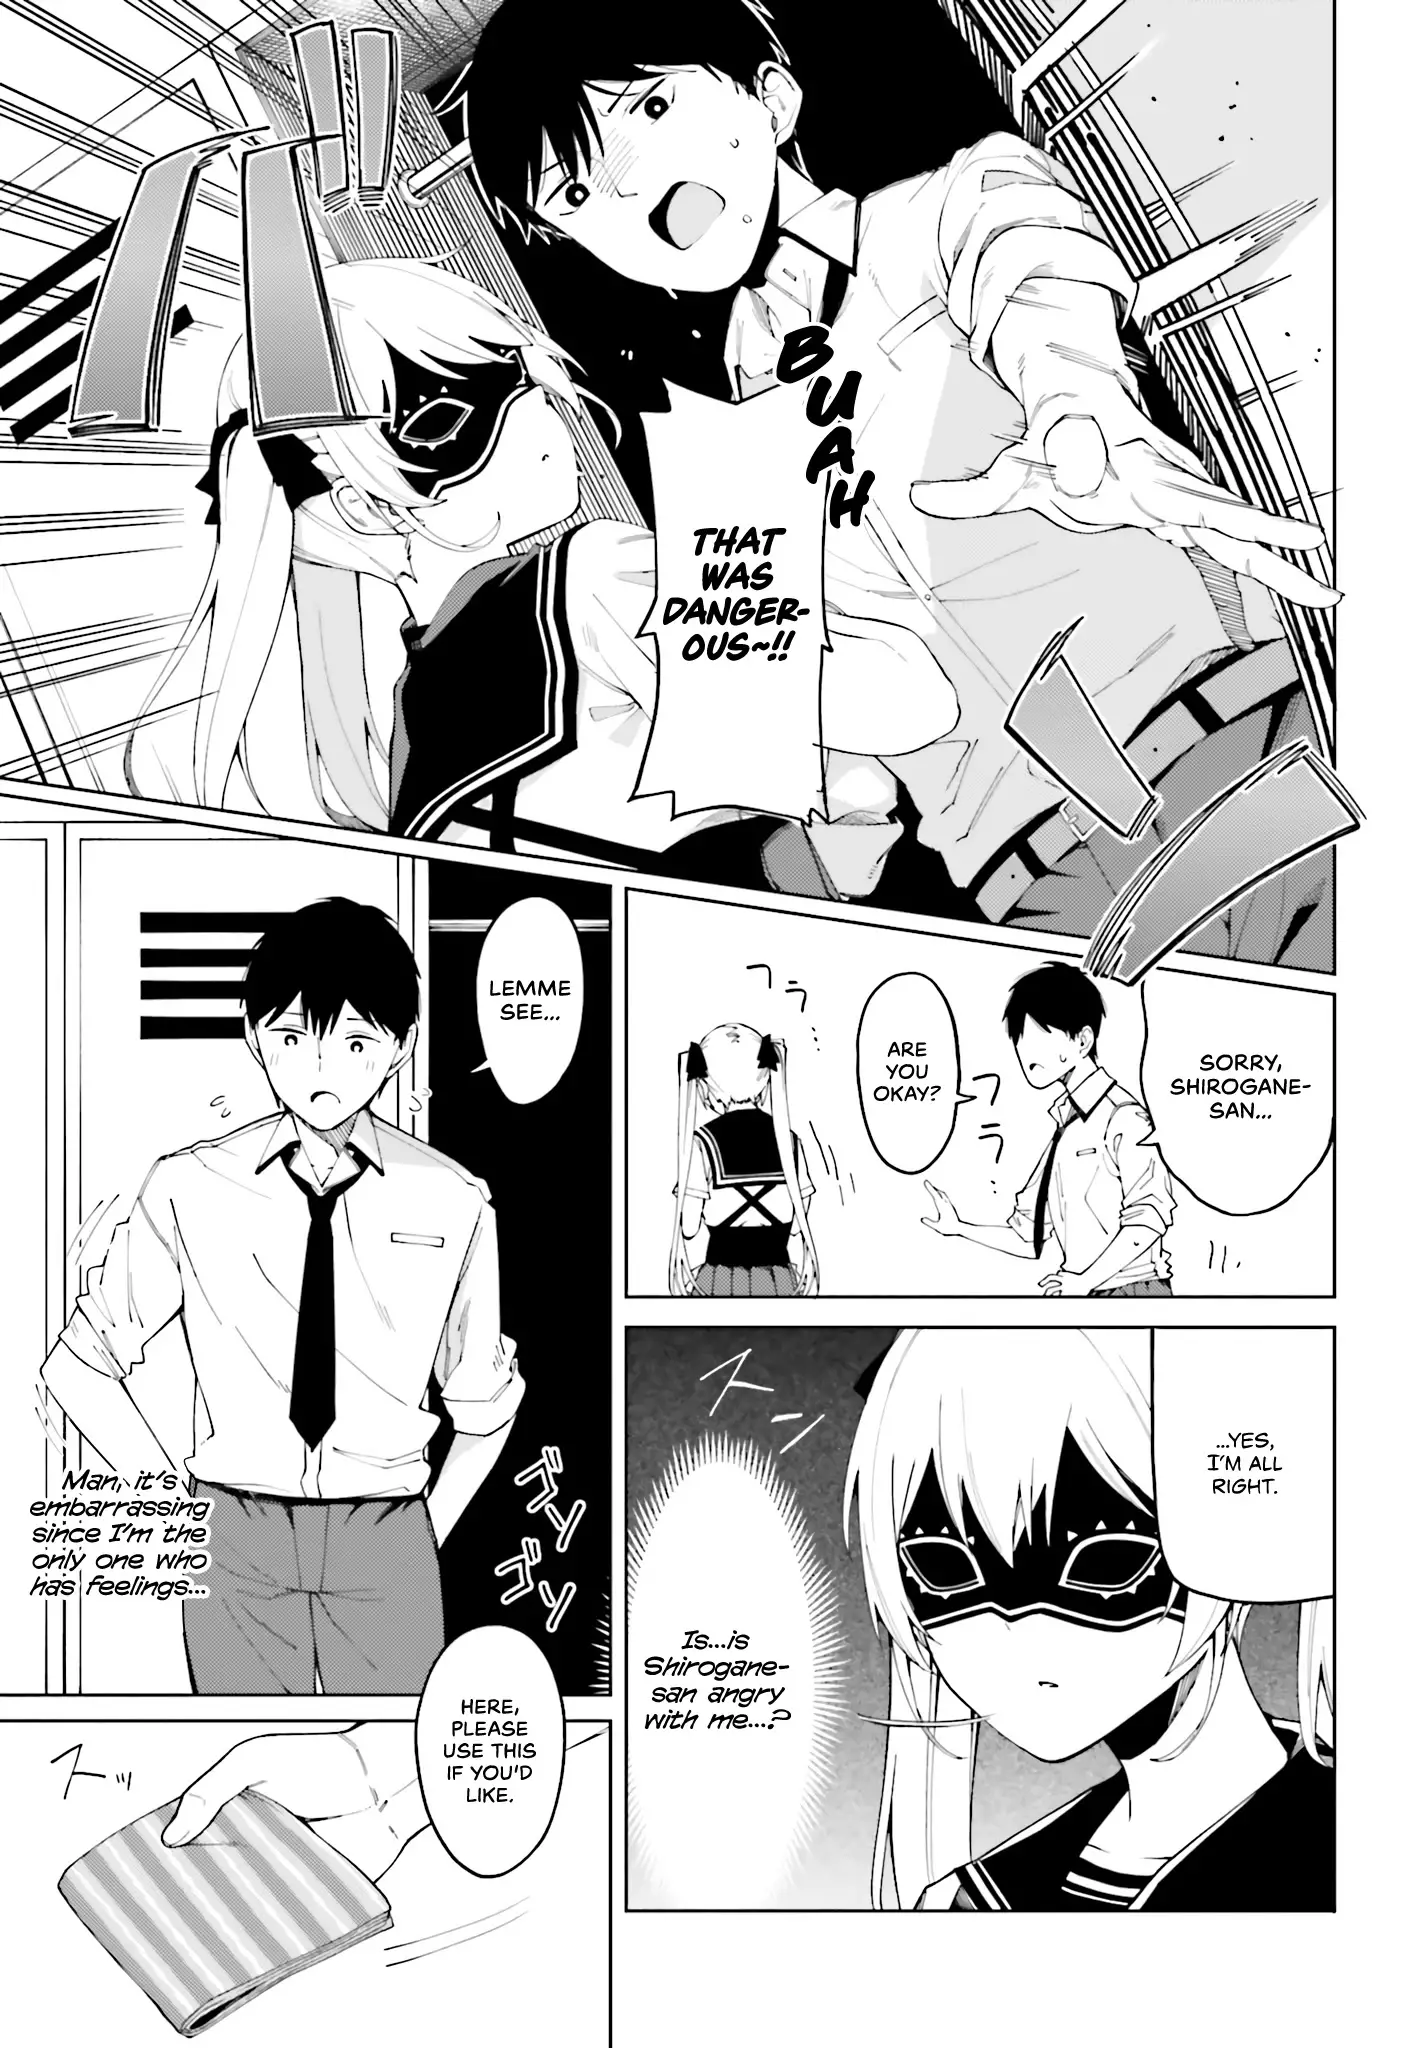 I Don't Understand Shirogane-San's Facial Expression At All - 1 page 28